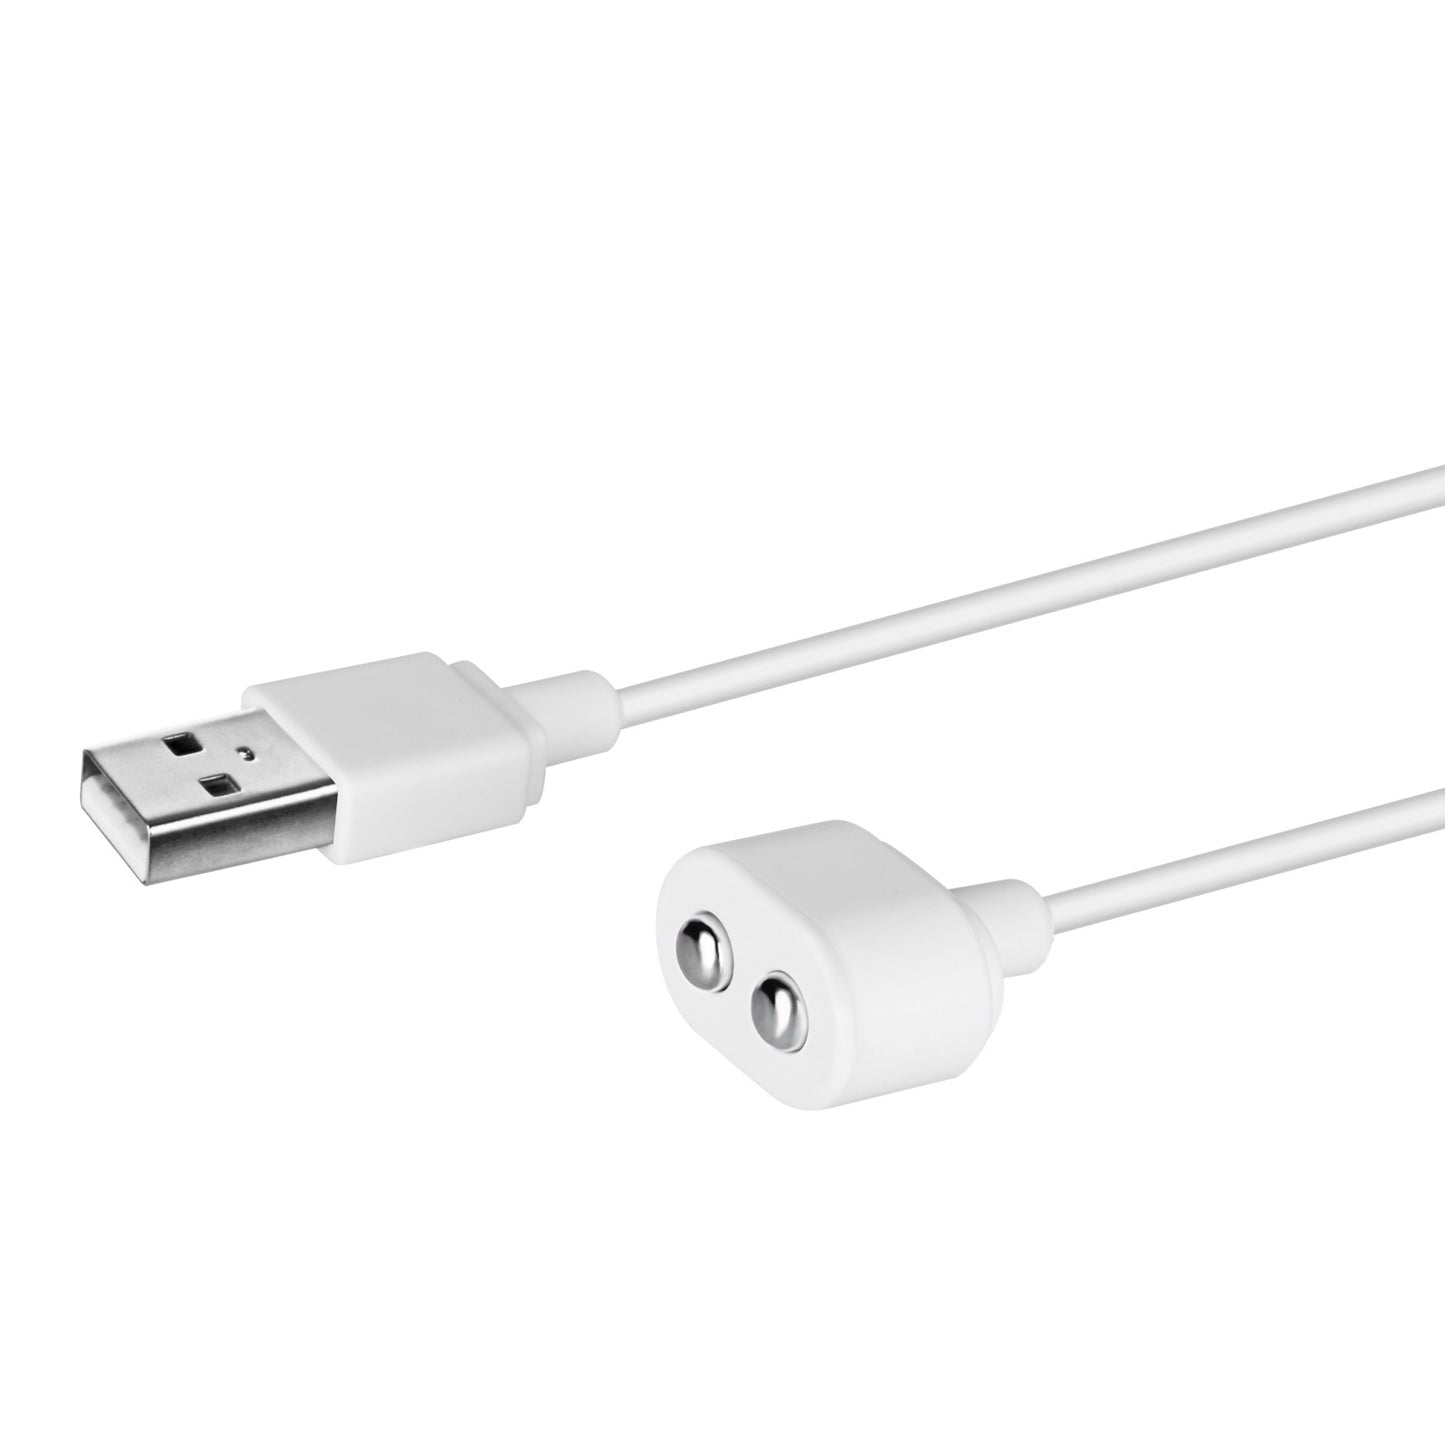 USB Charging Cable - White